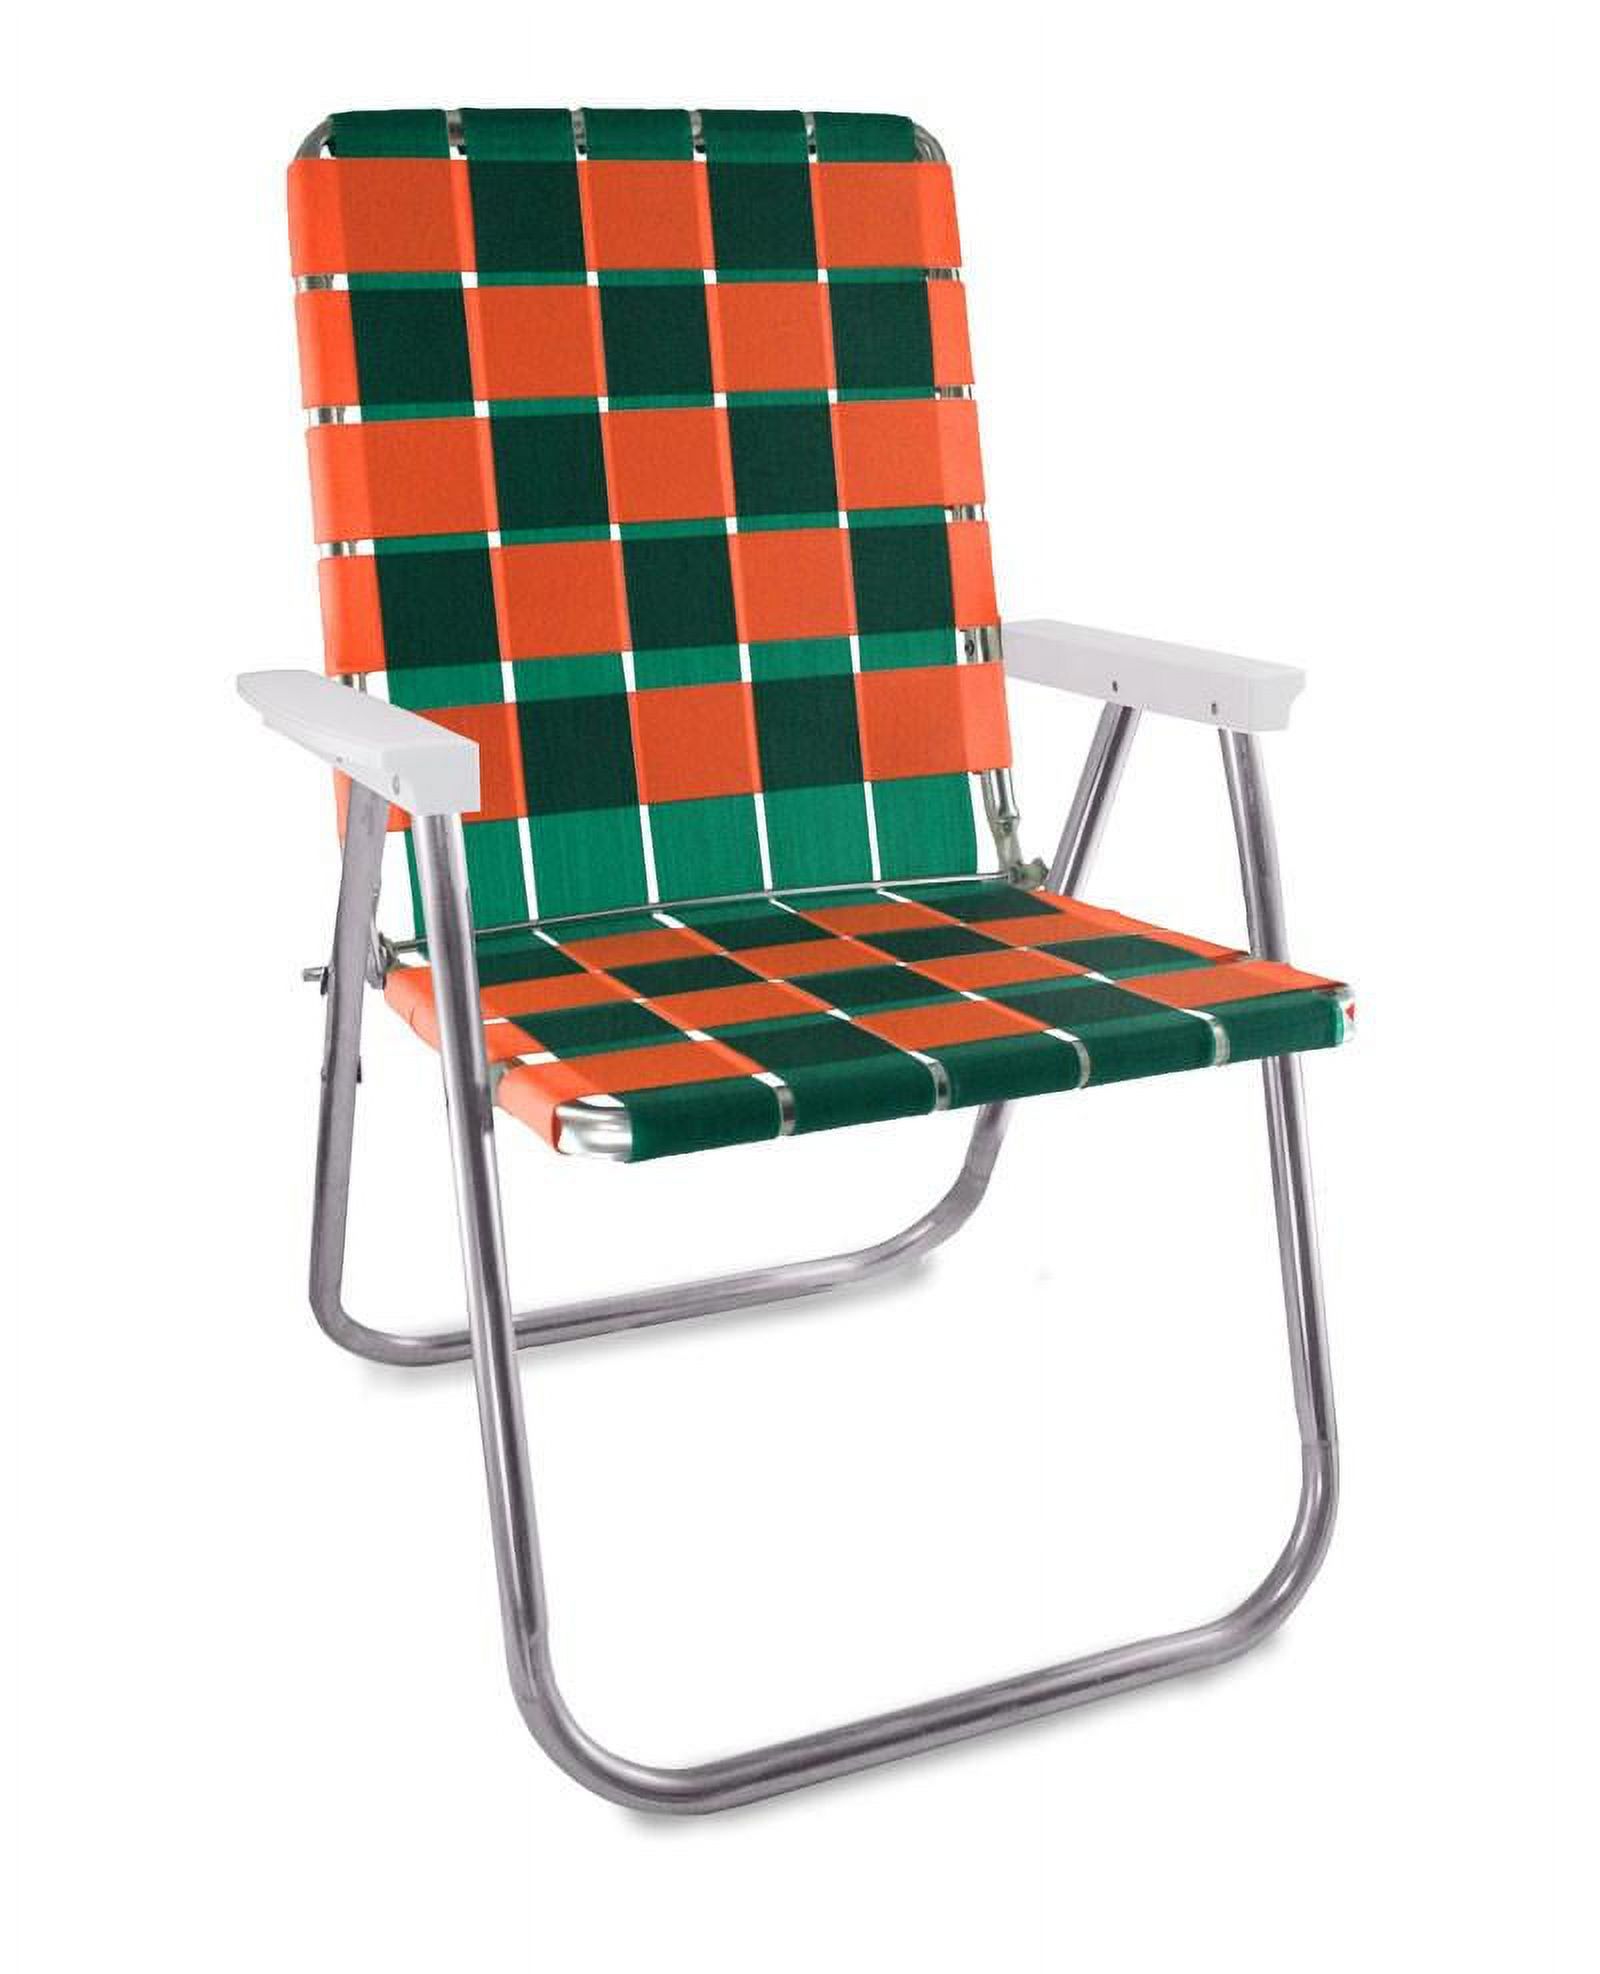 Lawn Chair USA American Made Folding Lightweight Aluminum Webbing Chair - image 1 of 7